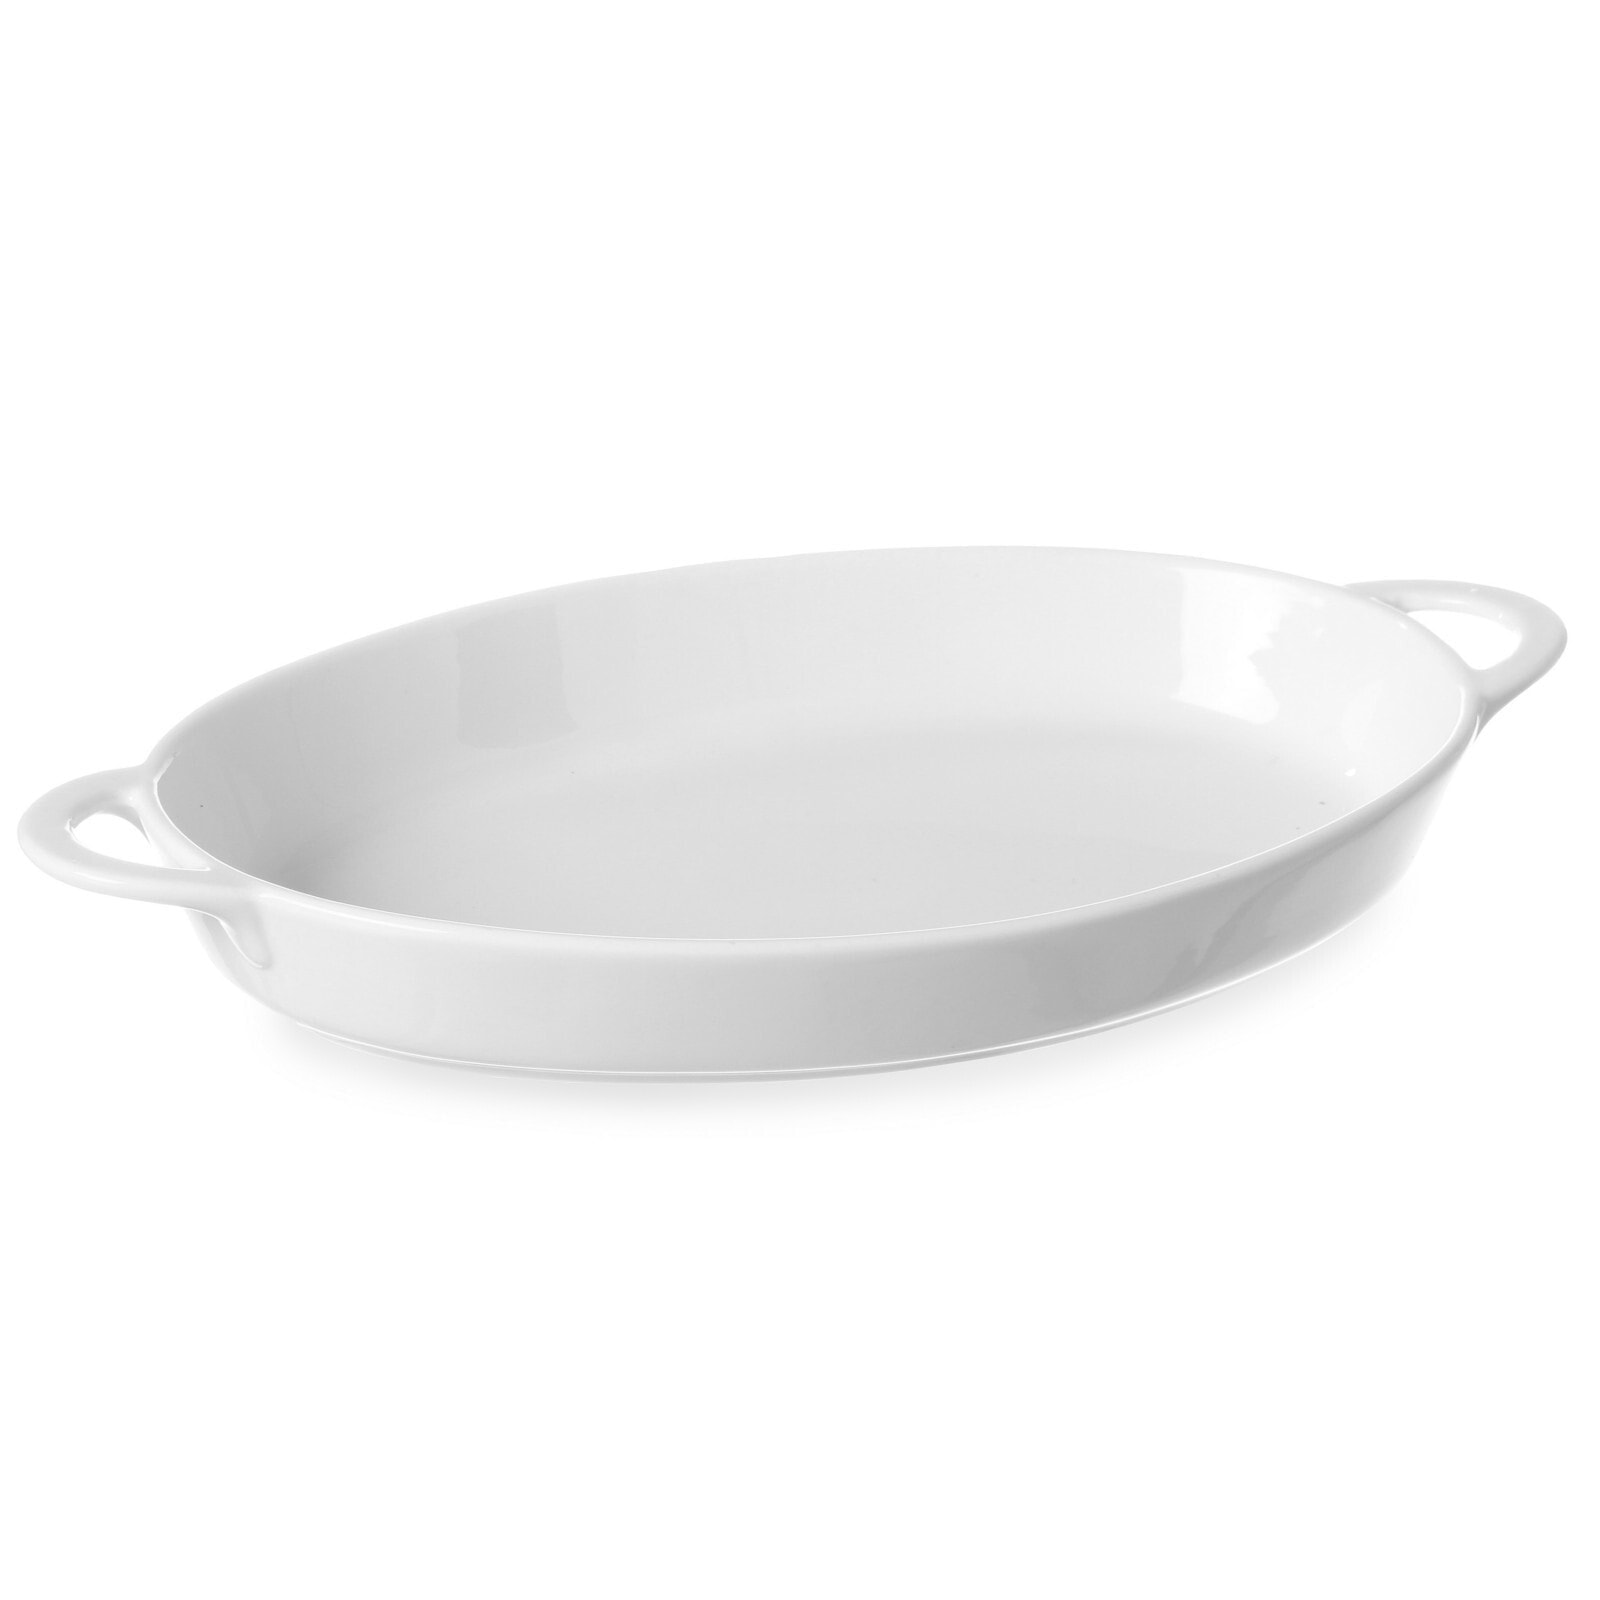 Oval baking dish with handles 165x105x30mm white porcelain - Hendi 784006